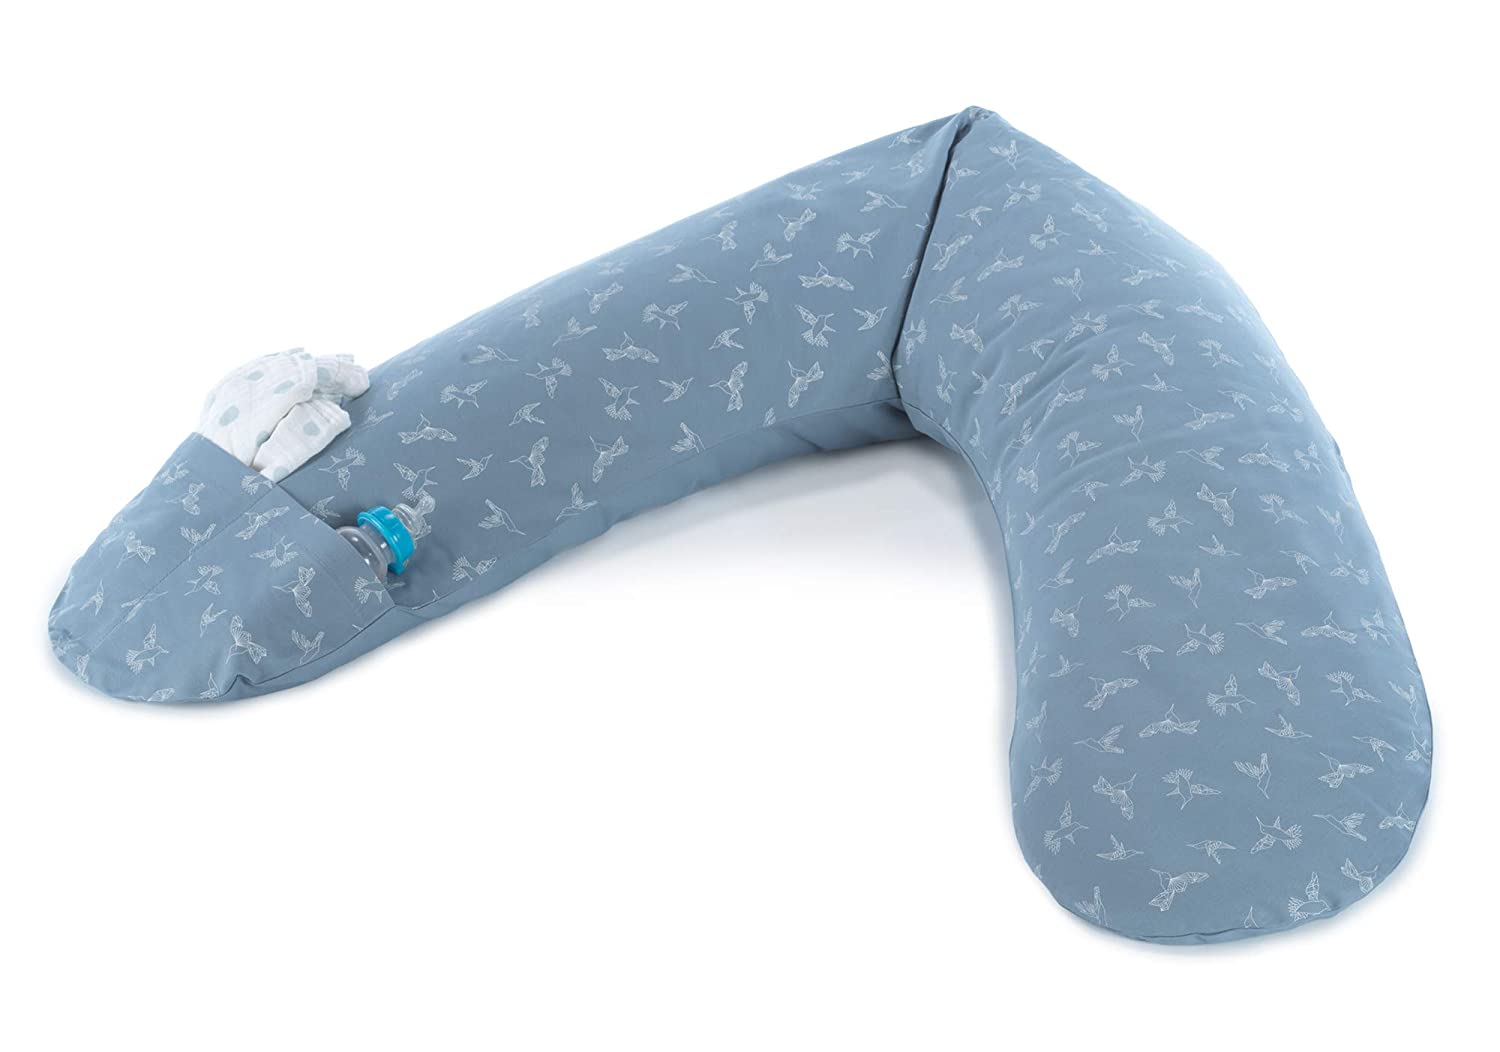 Replacement Cover For The Original Theraline Pregnancy And Nursing Pillow, 100% Cotton. Pocket attachment. Kolibris-Kangaroo Style Pockets